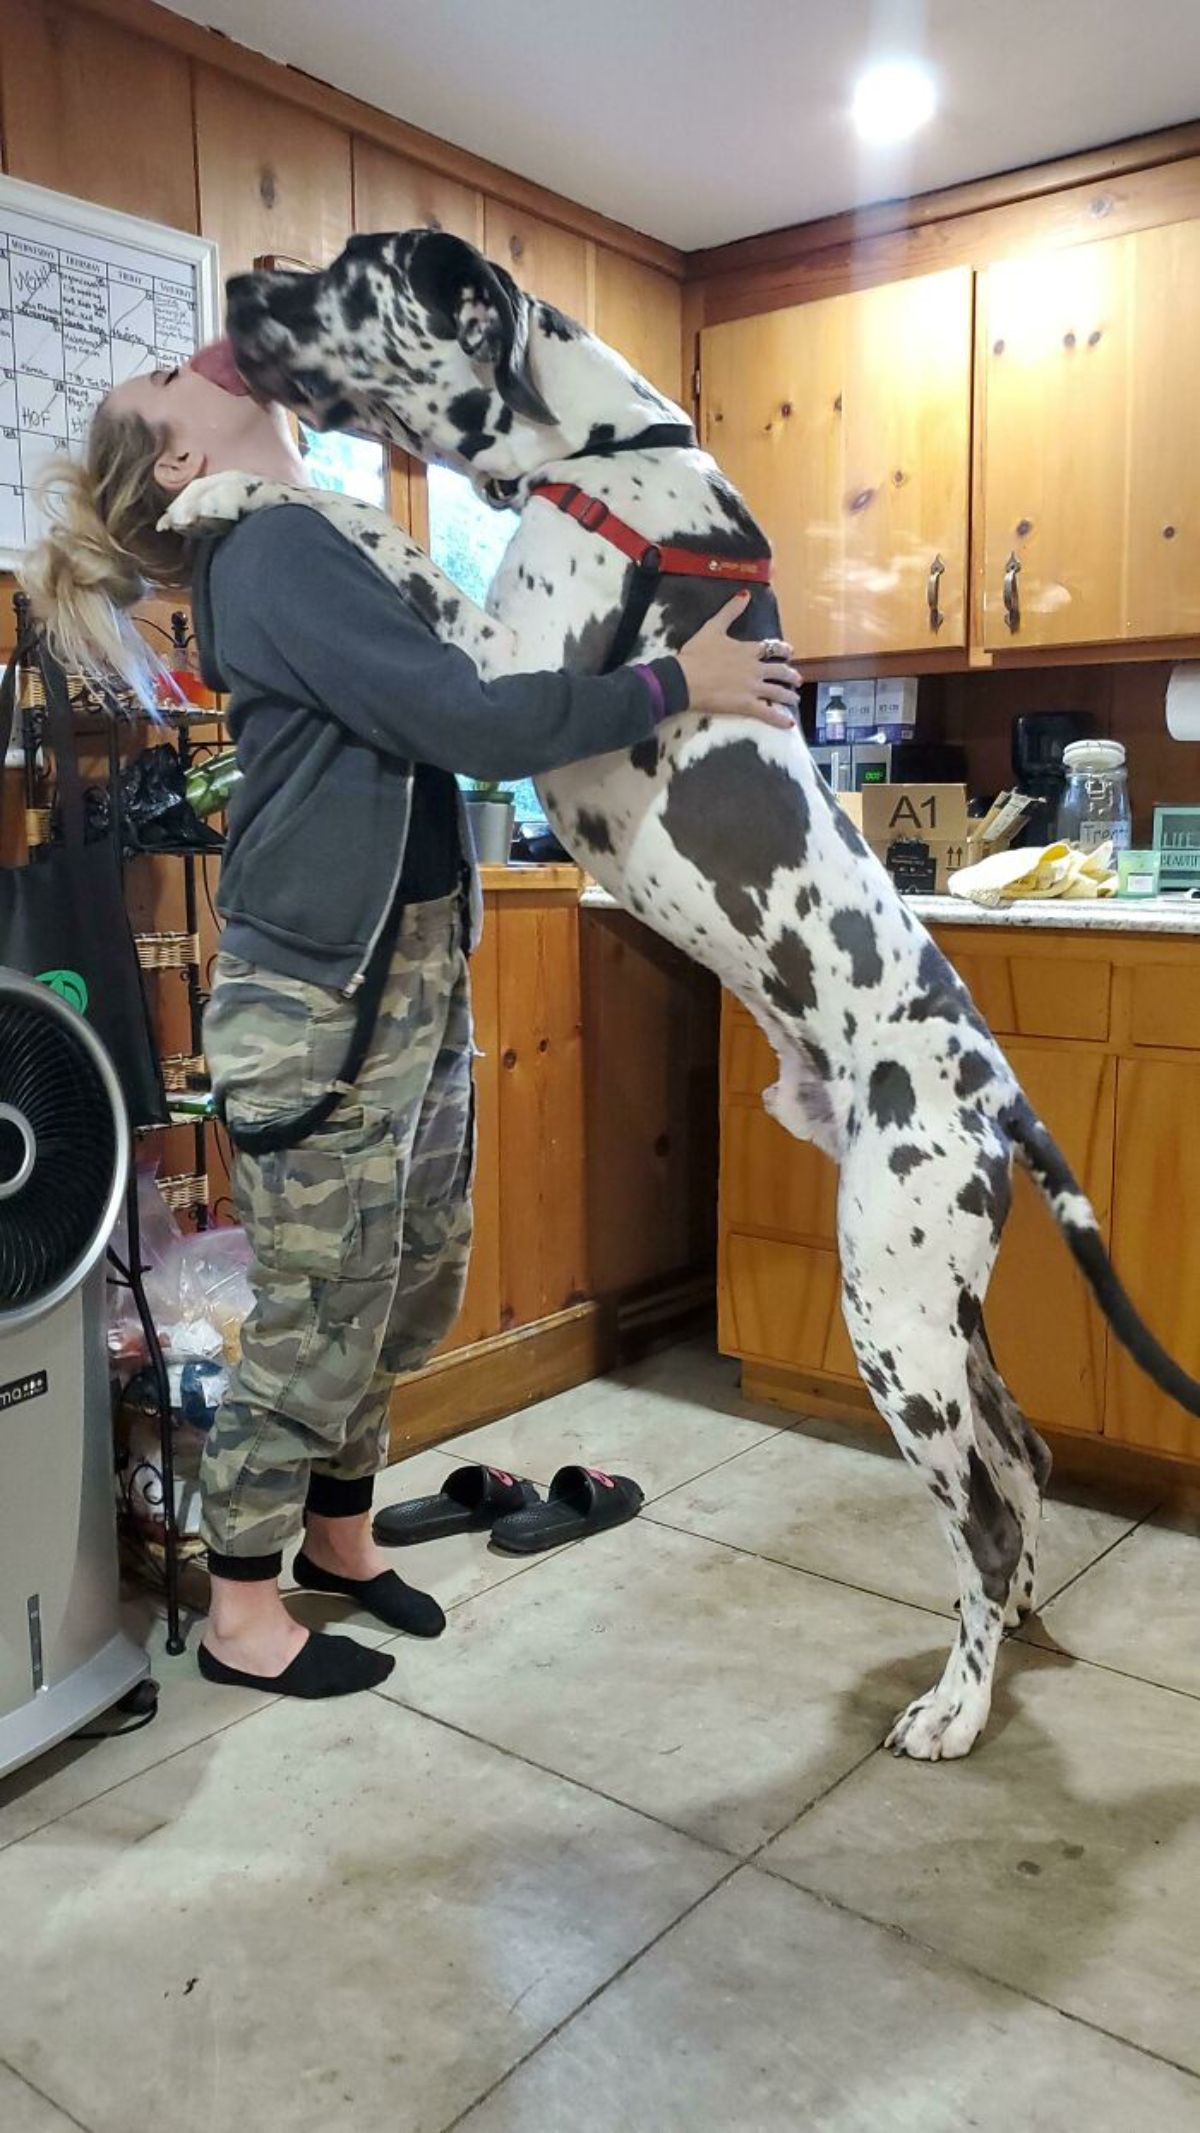 black and white dog standing on hind legs with front legs on a woman's shoulders and licking her face